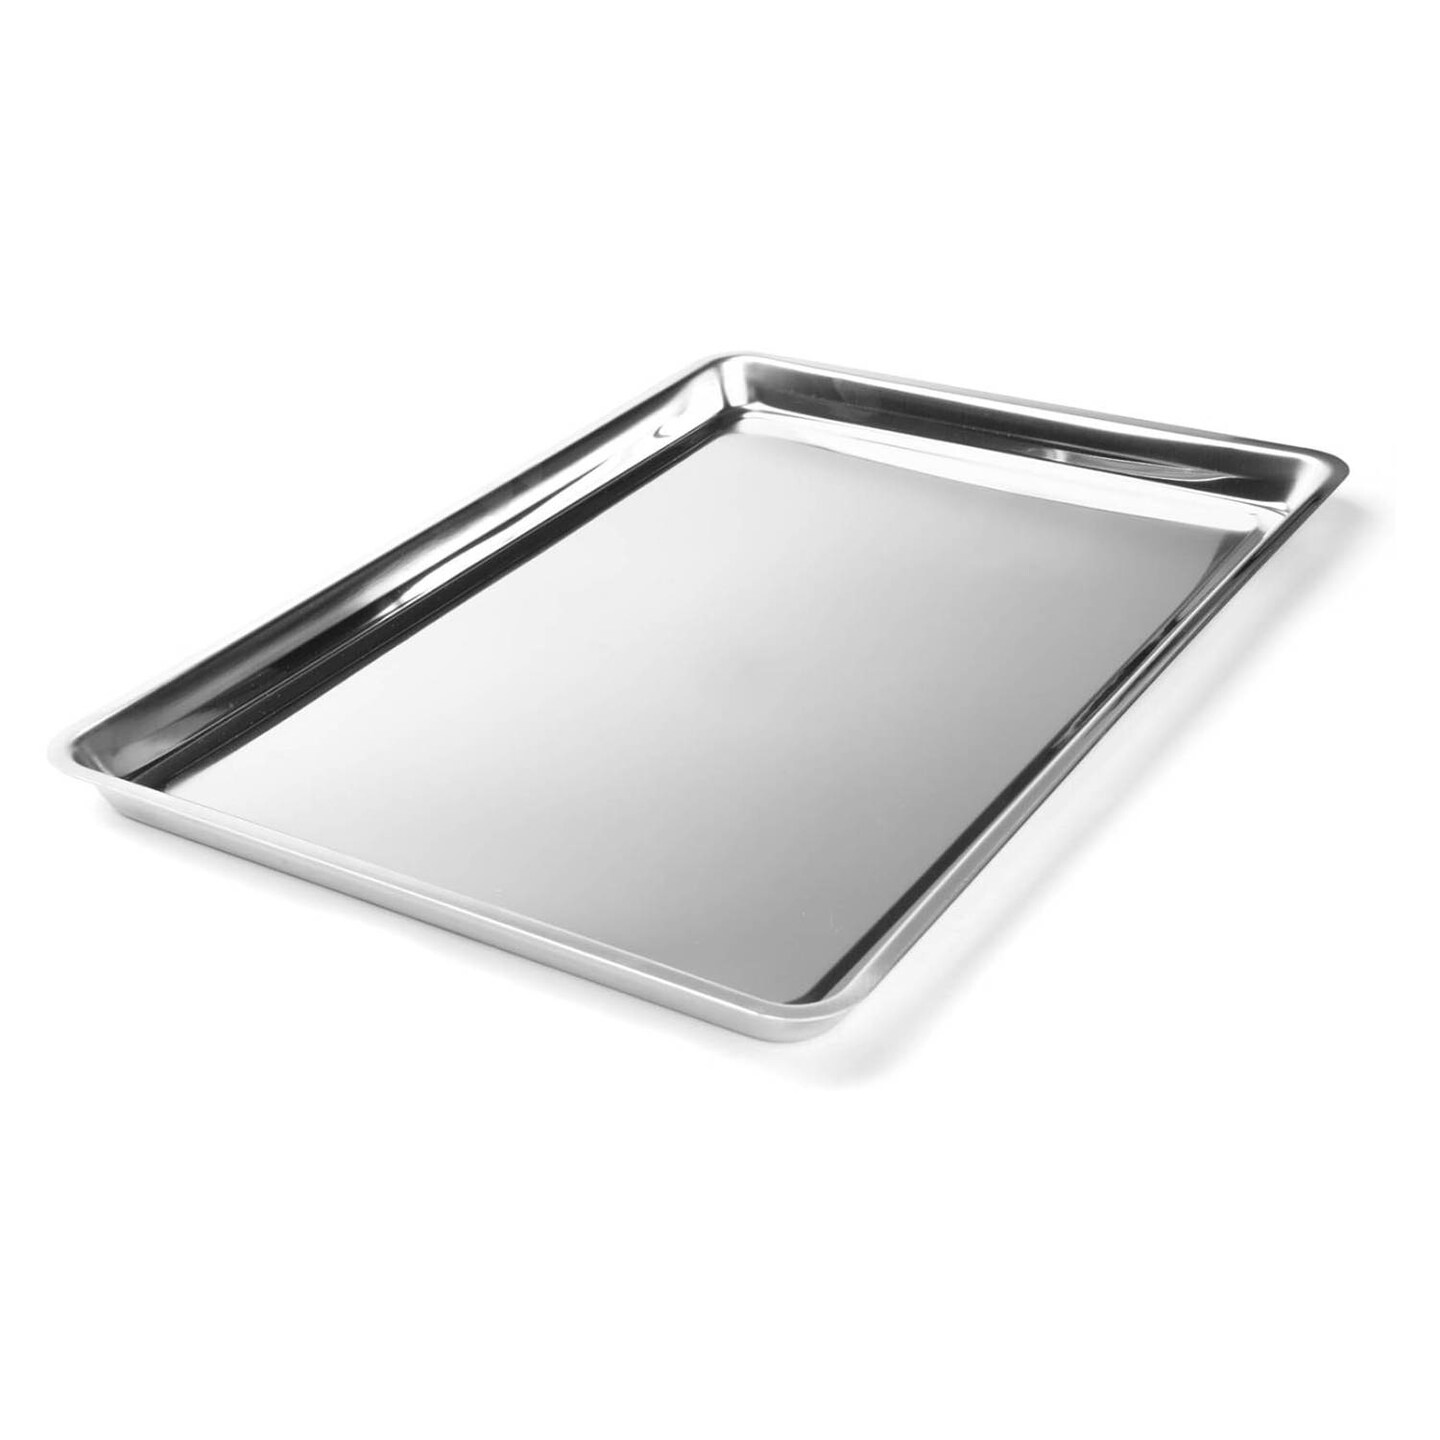 Fox Run Stainless Steel Jelly Roll Pan &#x26; Cookie Baking Sheet, 16.25 x 11.25 x 0.75 inches